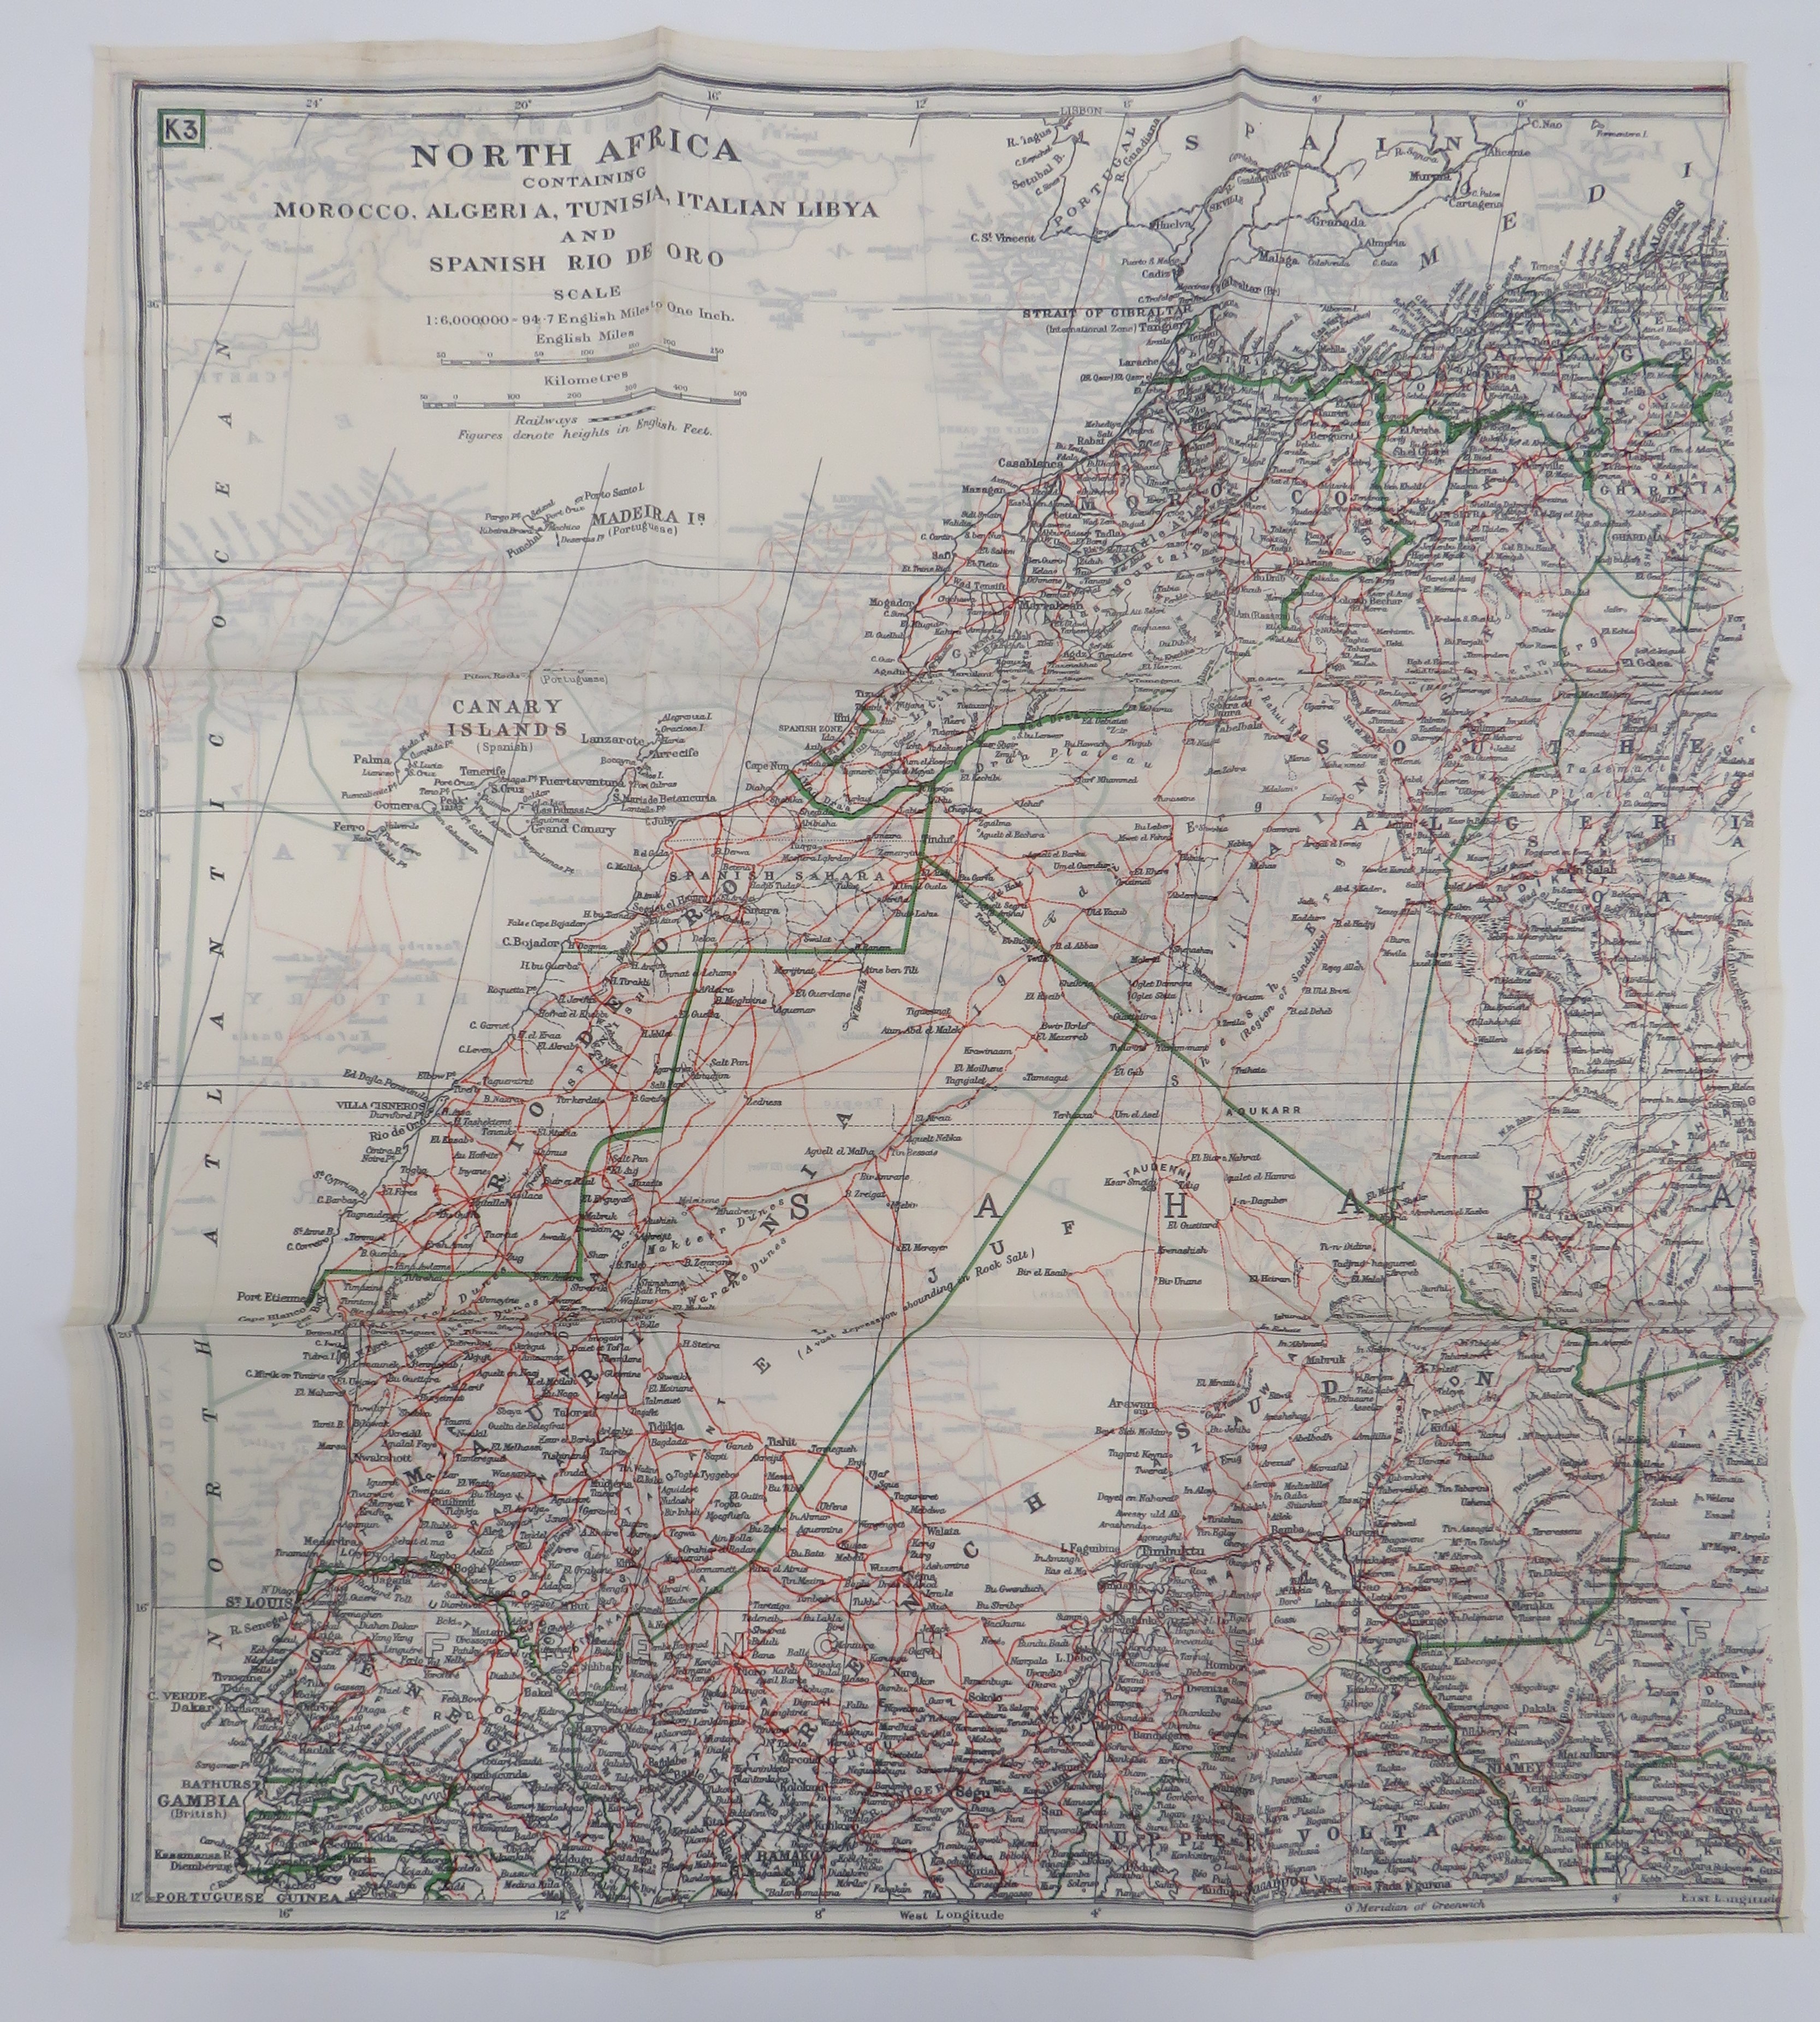 RAF WW2 Silk Escape Map North Africa colour printed, double sided, "K2/K3" silk map covering